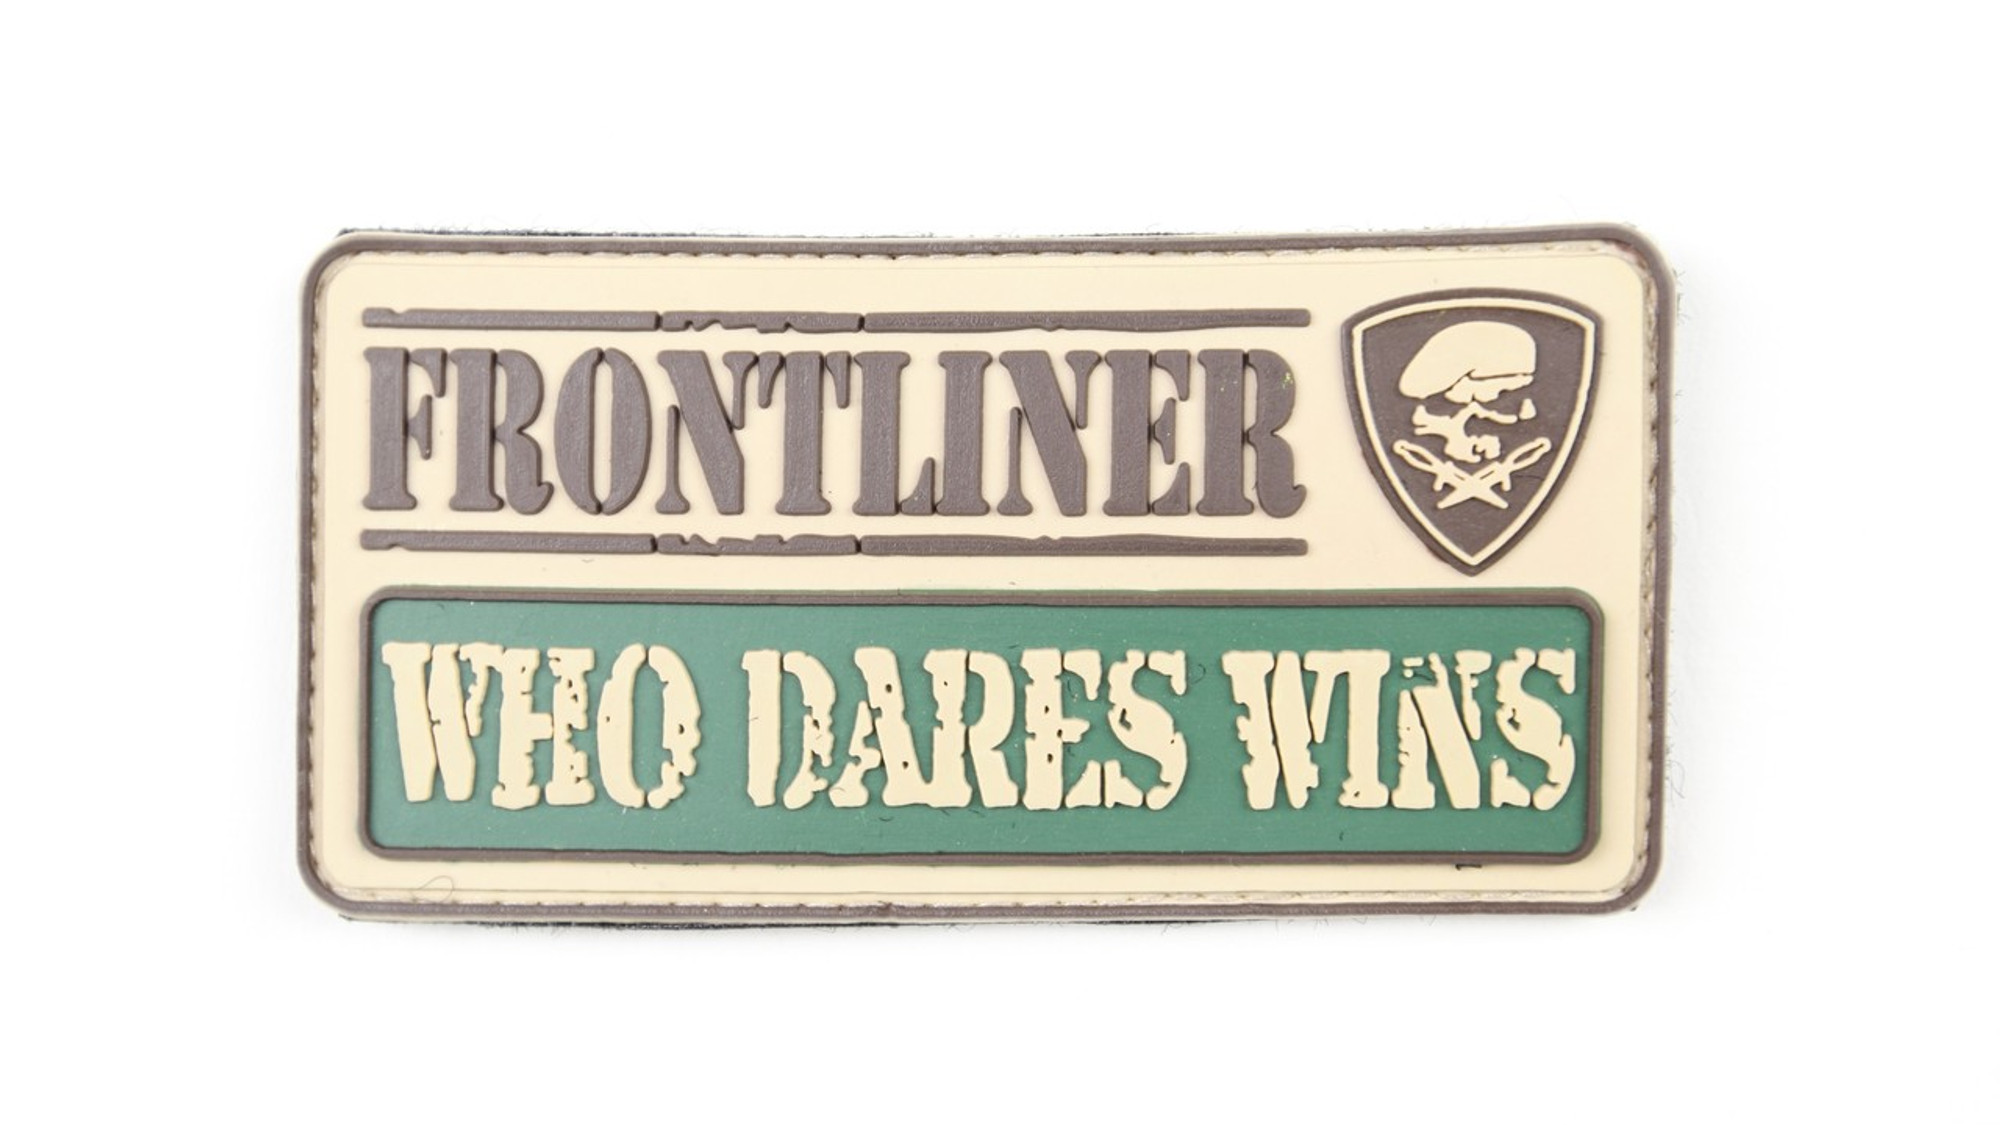 Frontliner - Who Dares Wins - Tan - Morale Patch